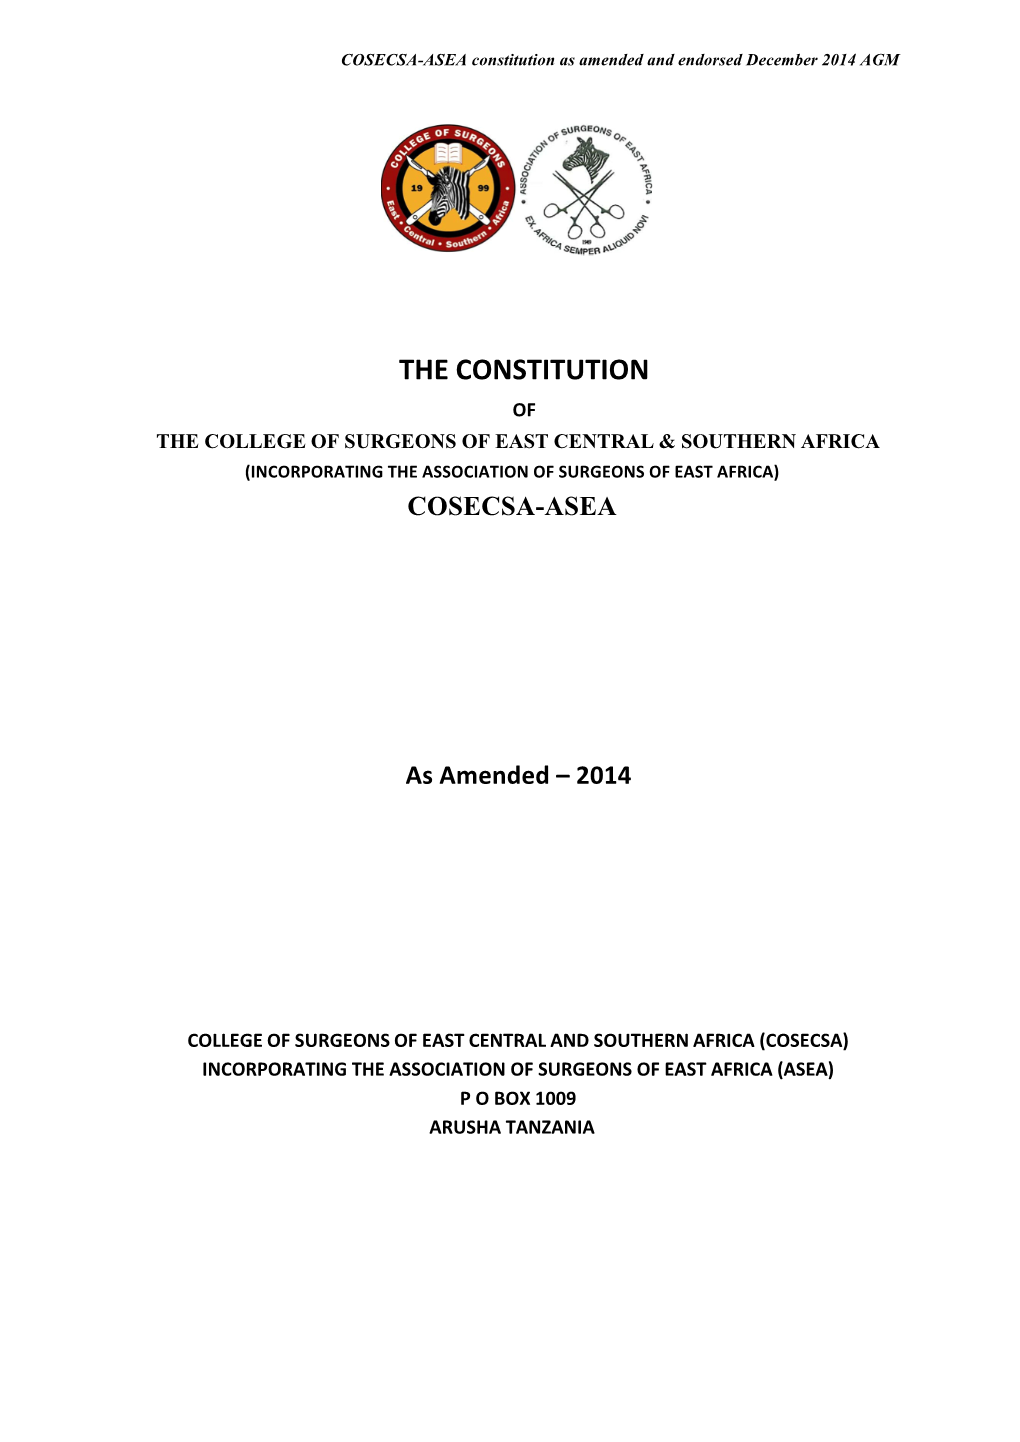 The Constitution of the College of Surgeons of East Central & Southern Africa (Incorporating the Association of Surgeons of East Africa) Cosecsa-Asea